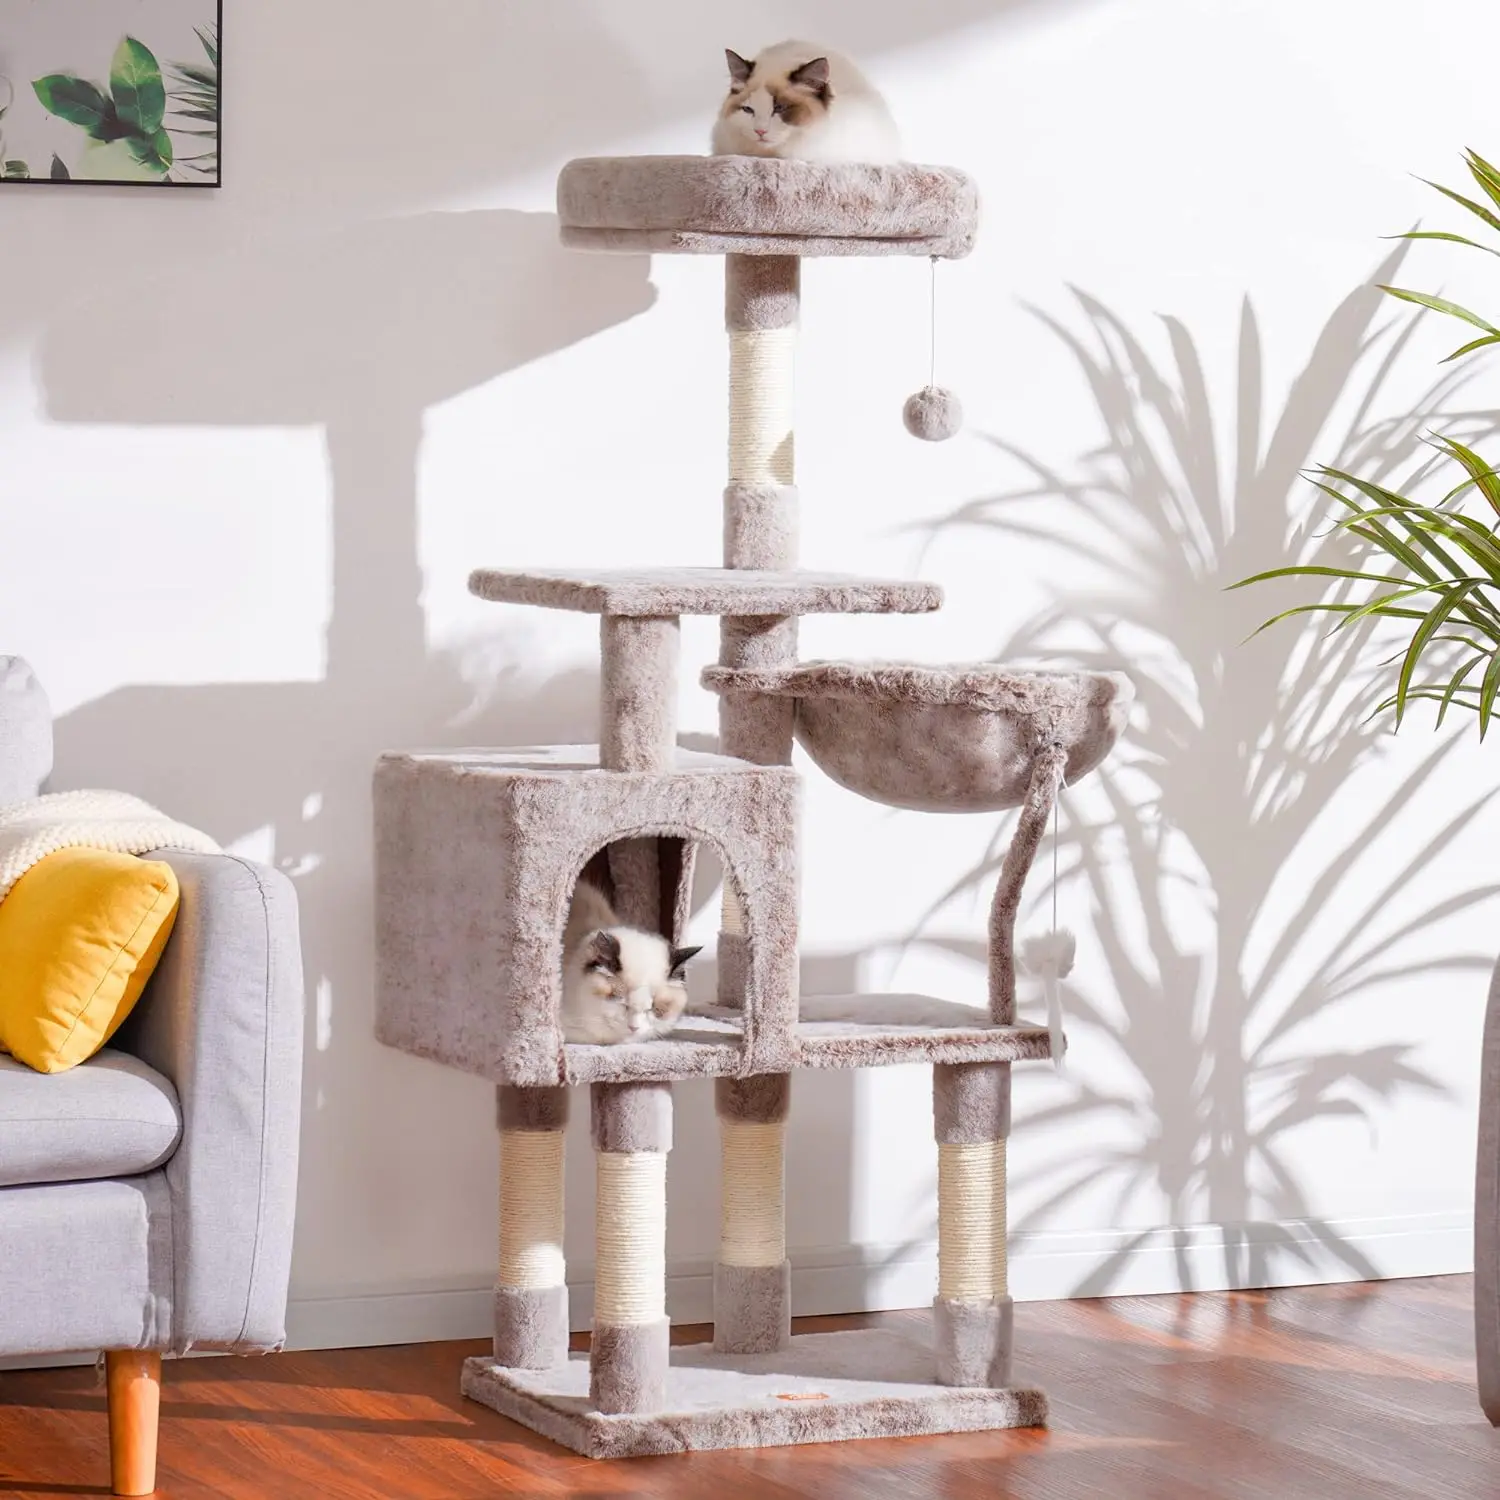 

Cat Tree with Toy, Cat Tower condo for Indoor Cats, Cat House with Padded Plush Perch, Cozy Hammock and Sisal Scratching